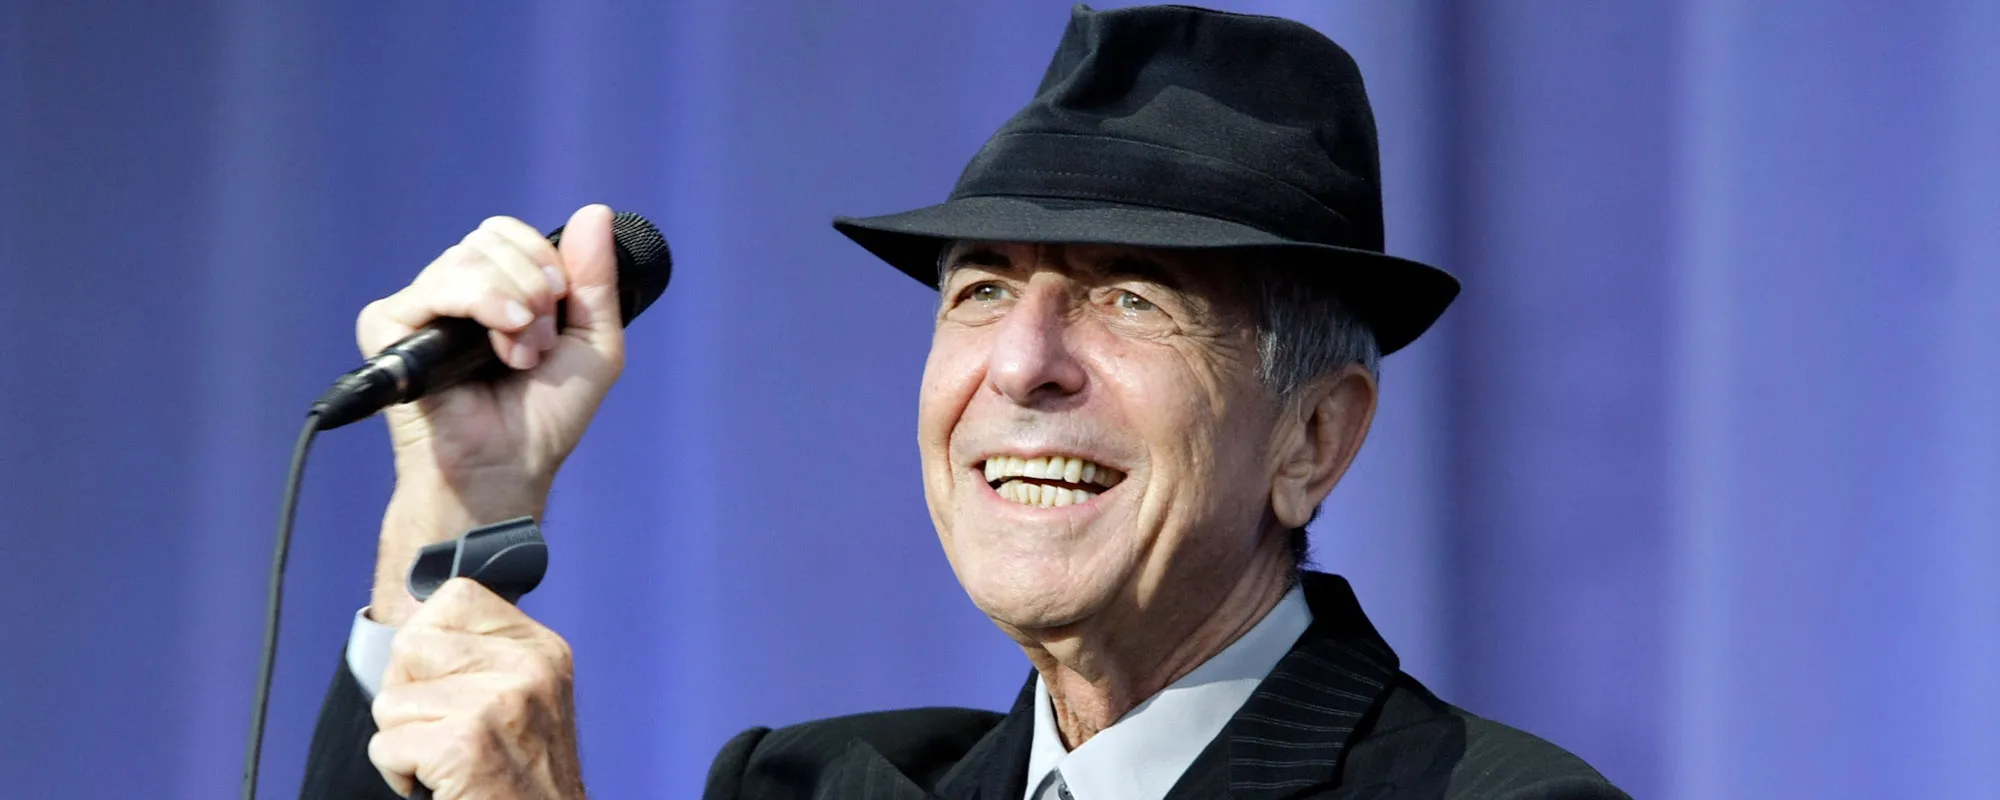 Review: Art of Time Ensemble Pays Tribute to the Art of Leonard Cohen